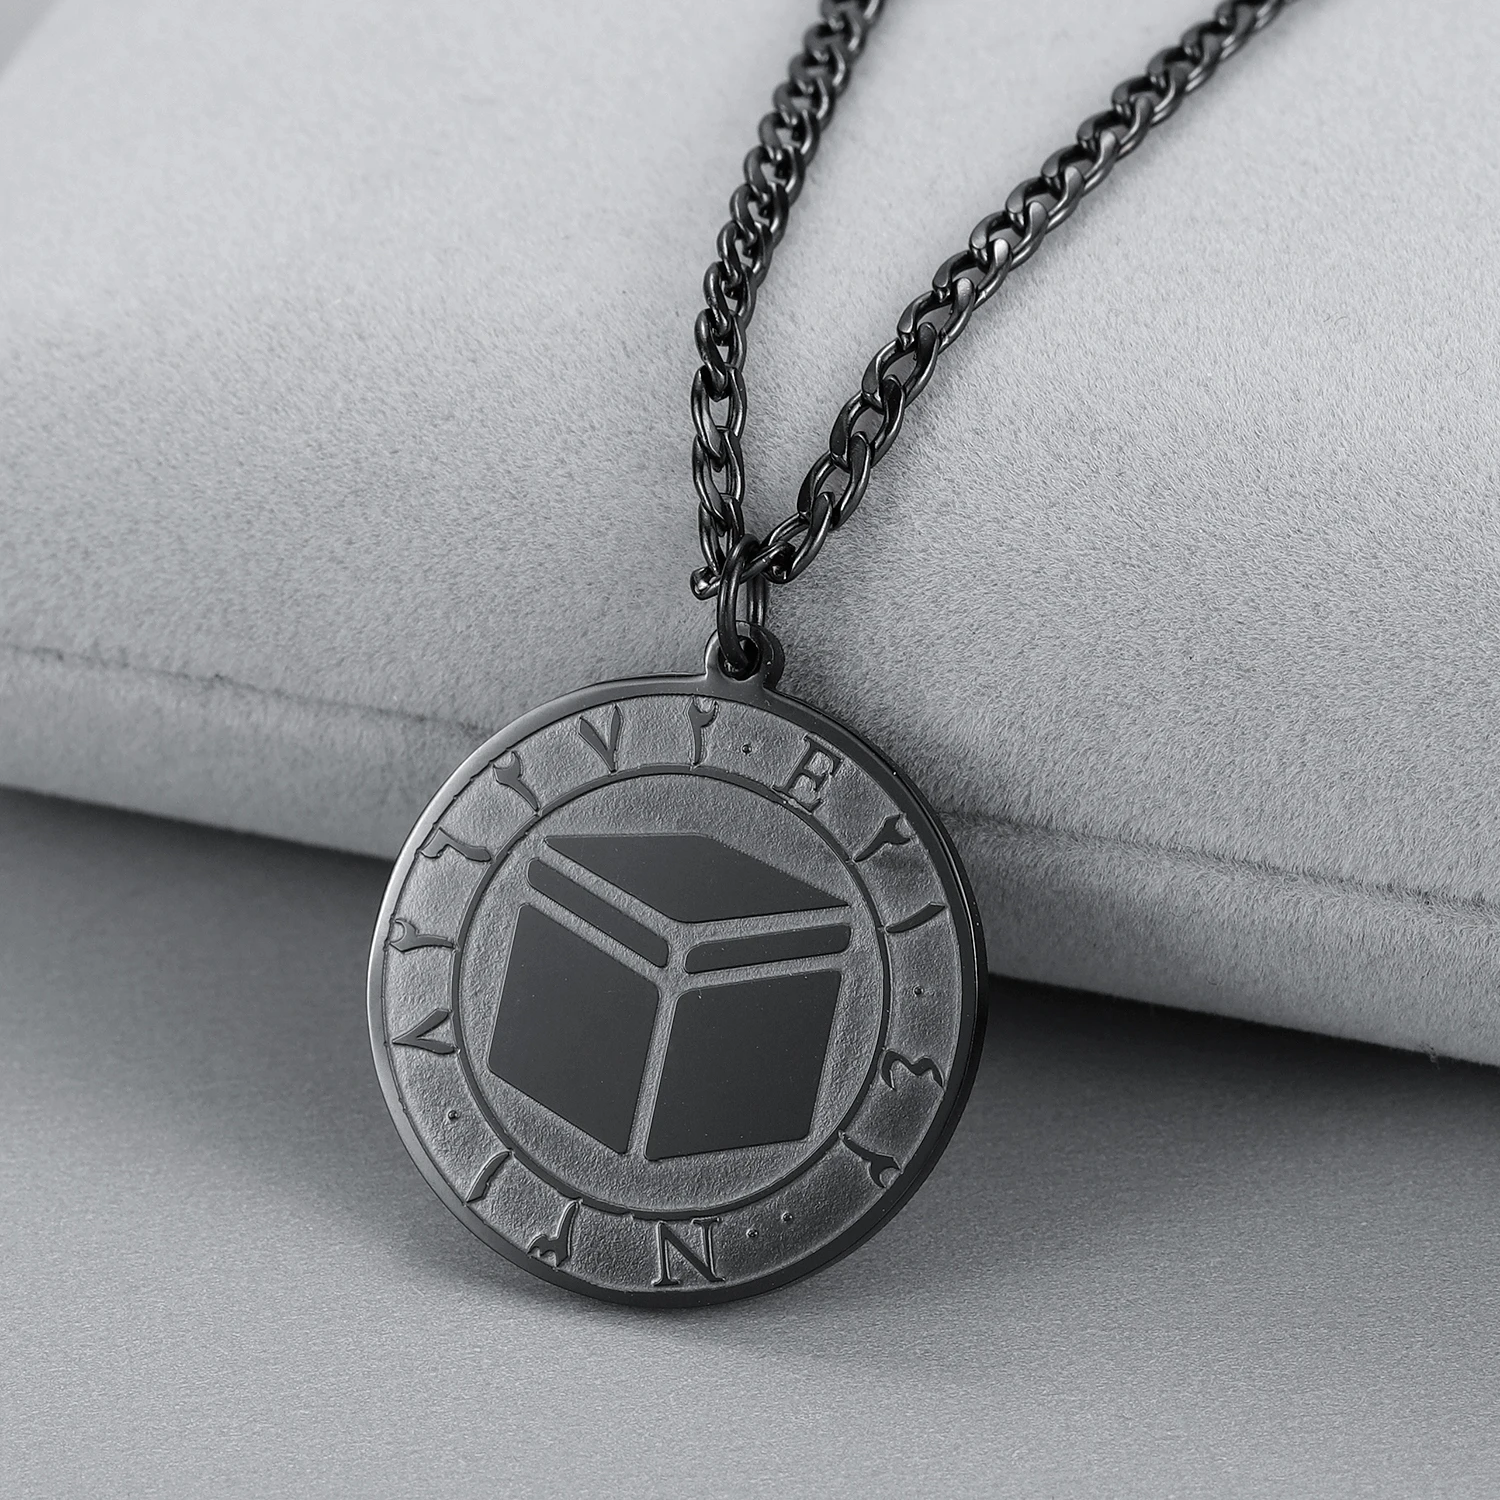 New Kaaba Coordinates Coin Necklace For Men Personalized Arabic English Letter Embossed Islam Pendants Stainless Stee Jewelry